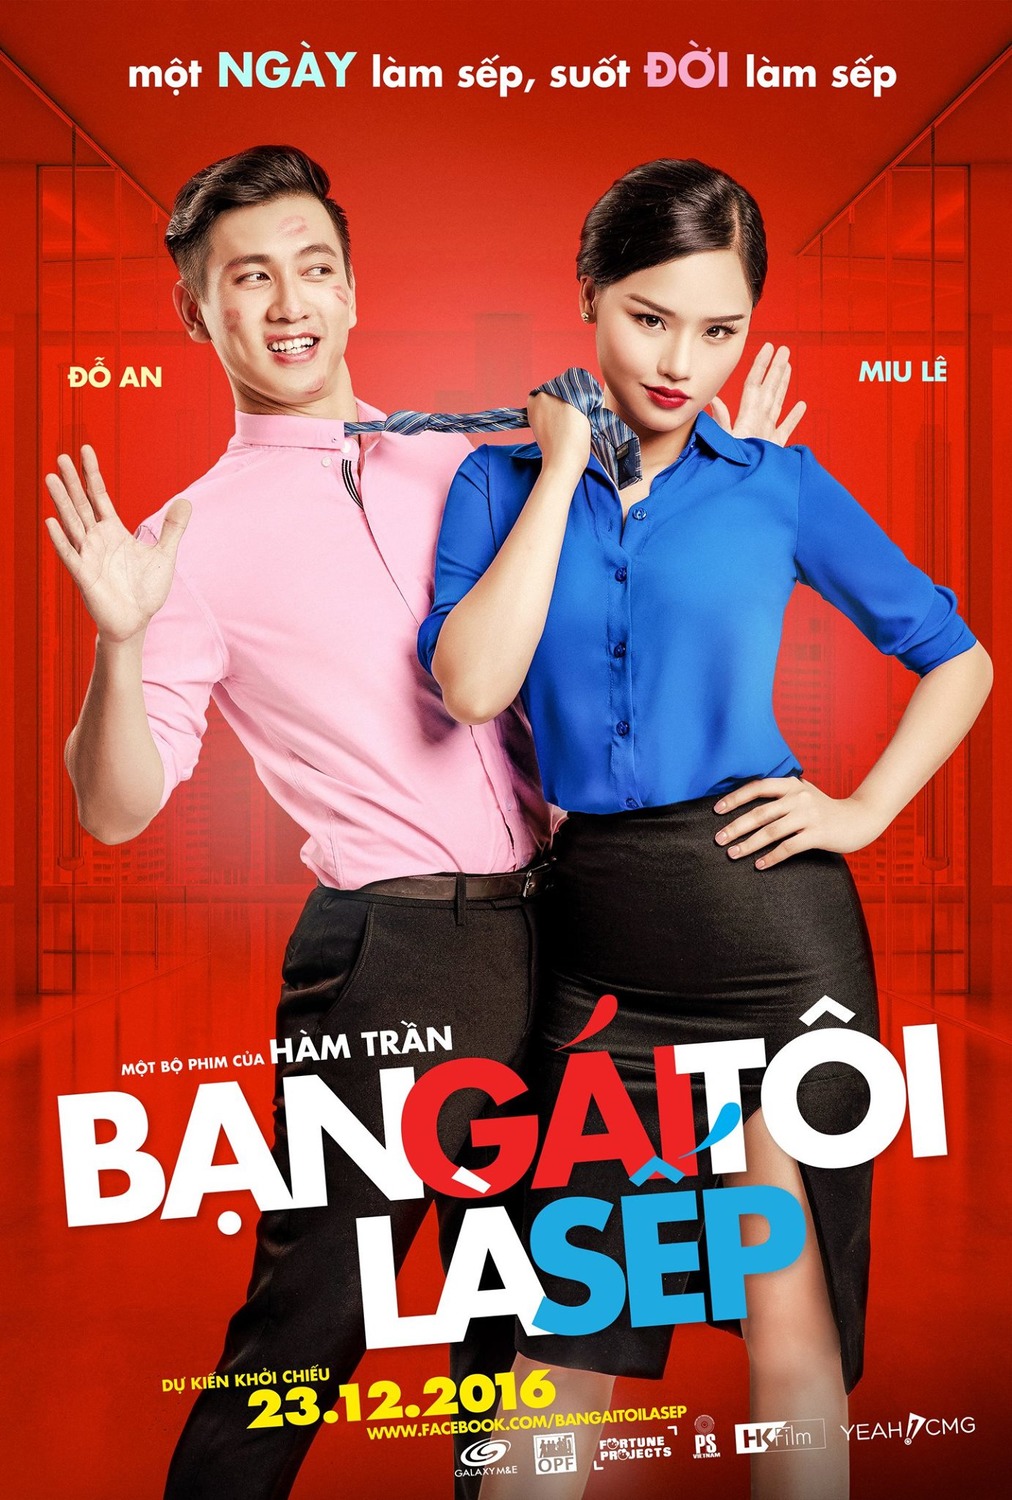 Extra Large Movie Poster Image for Ban Gai Toi La Sep (#10 of 15)